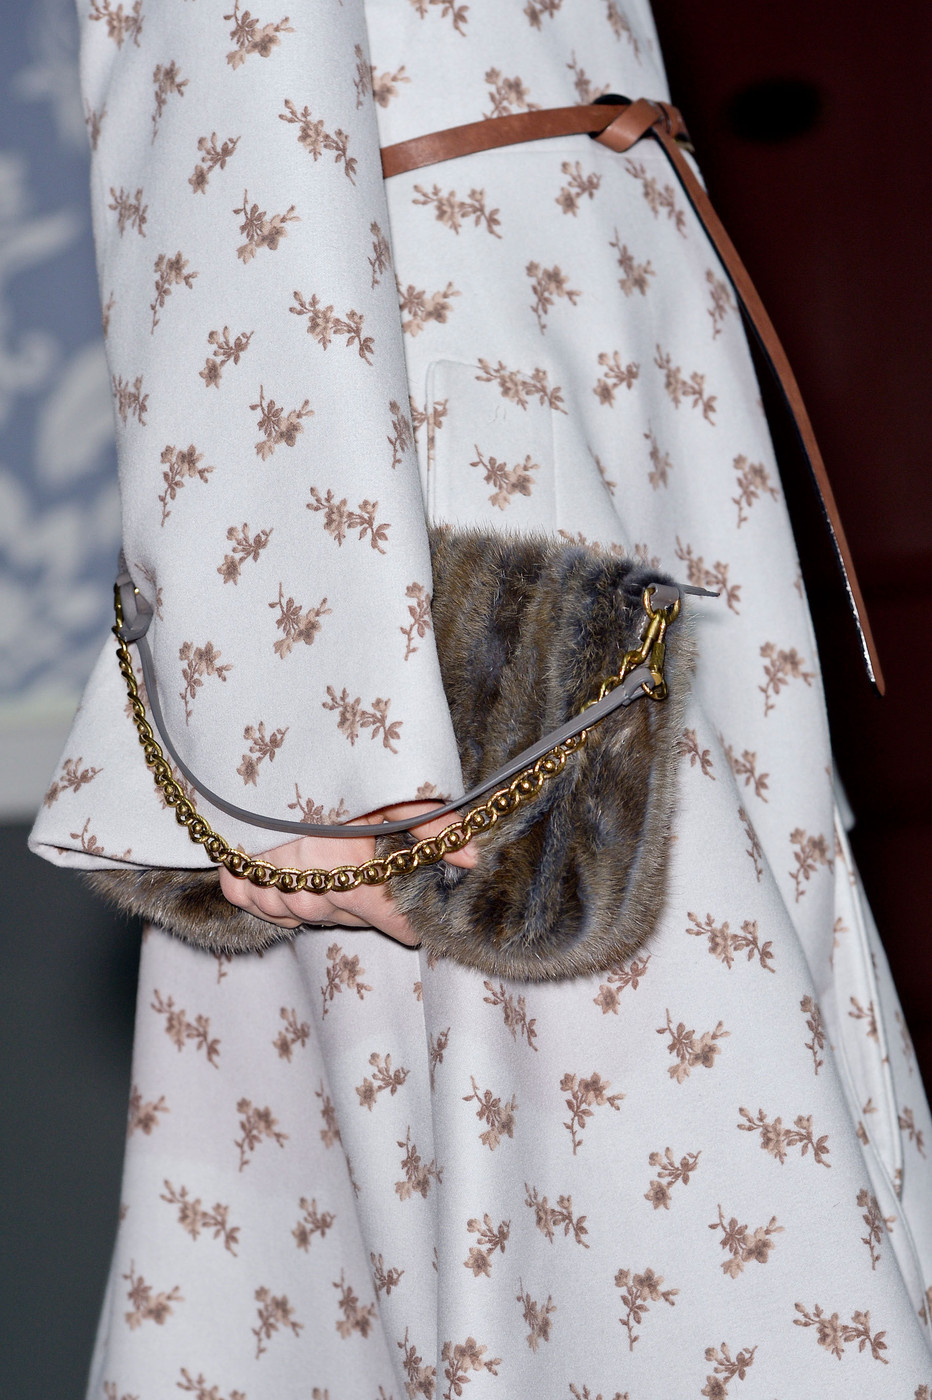 Louis Vuitton Fall Winter 2013 2014: The BAGS |In LVoe ...